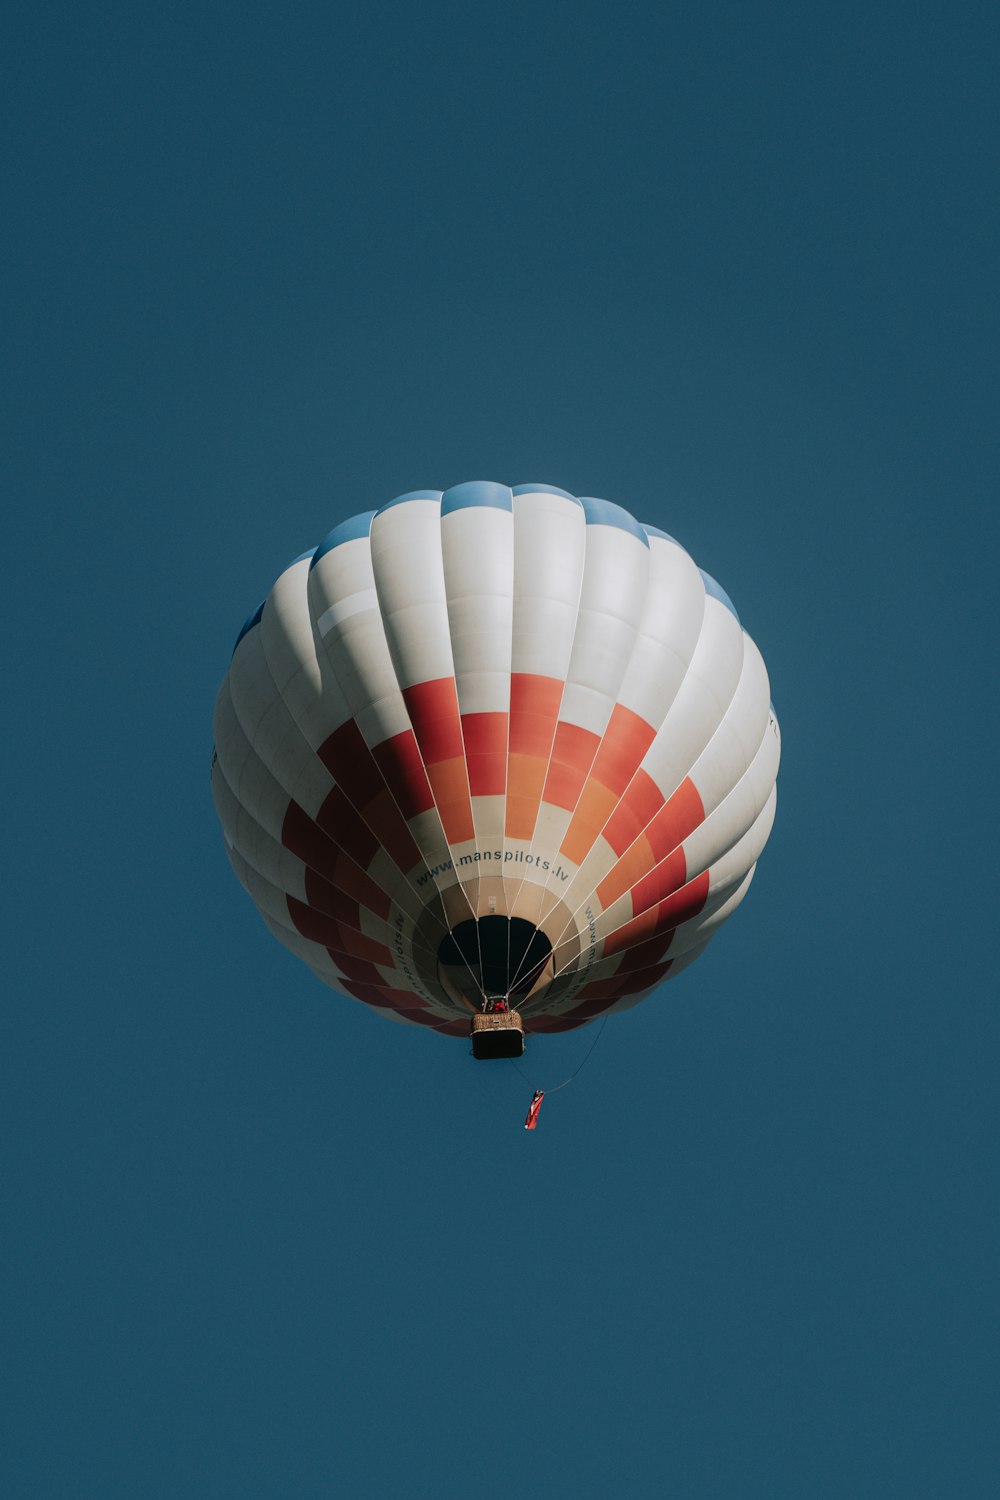 red white and blue hot air balloon in mid air under blue sky during daytime